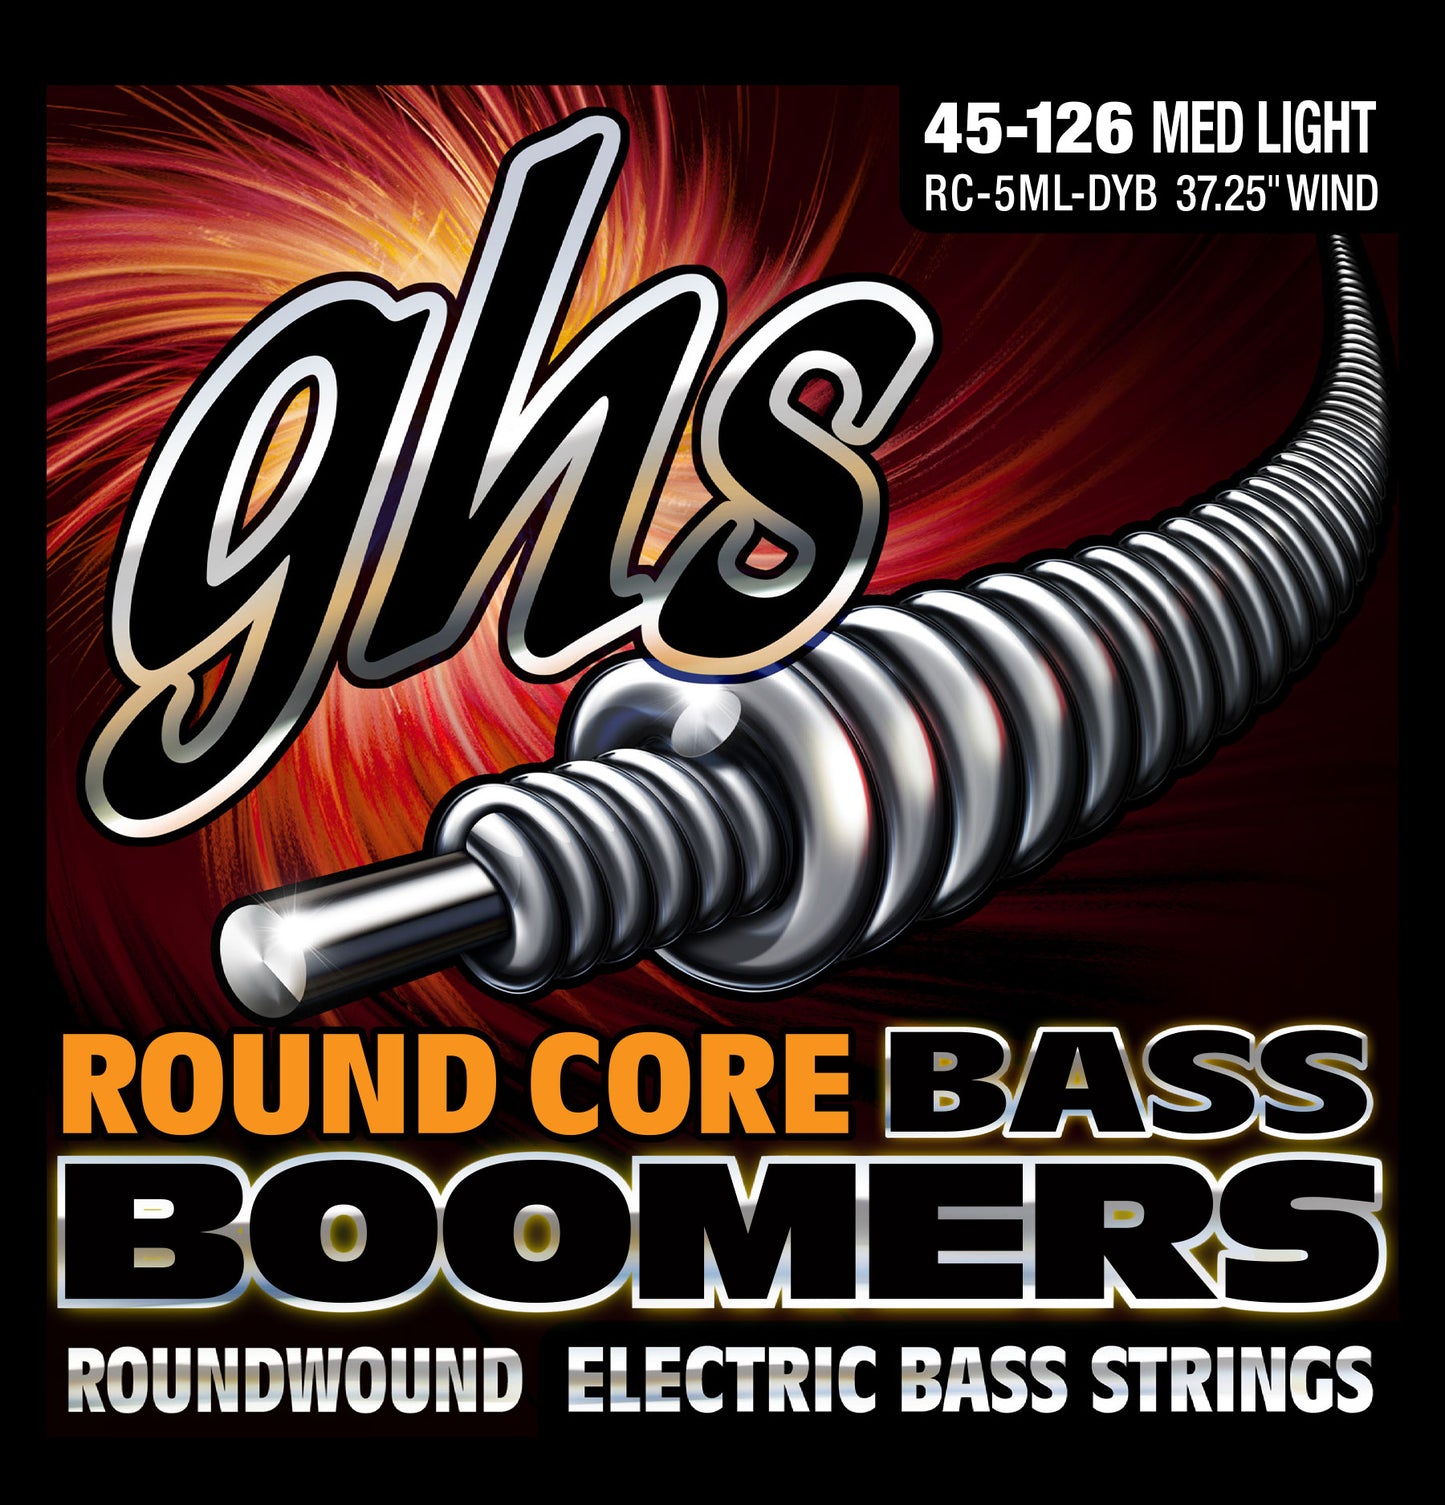 GHS Roundcore Bass Boomers, 5-String 45-126, RC-5ML-DYB